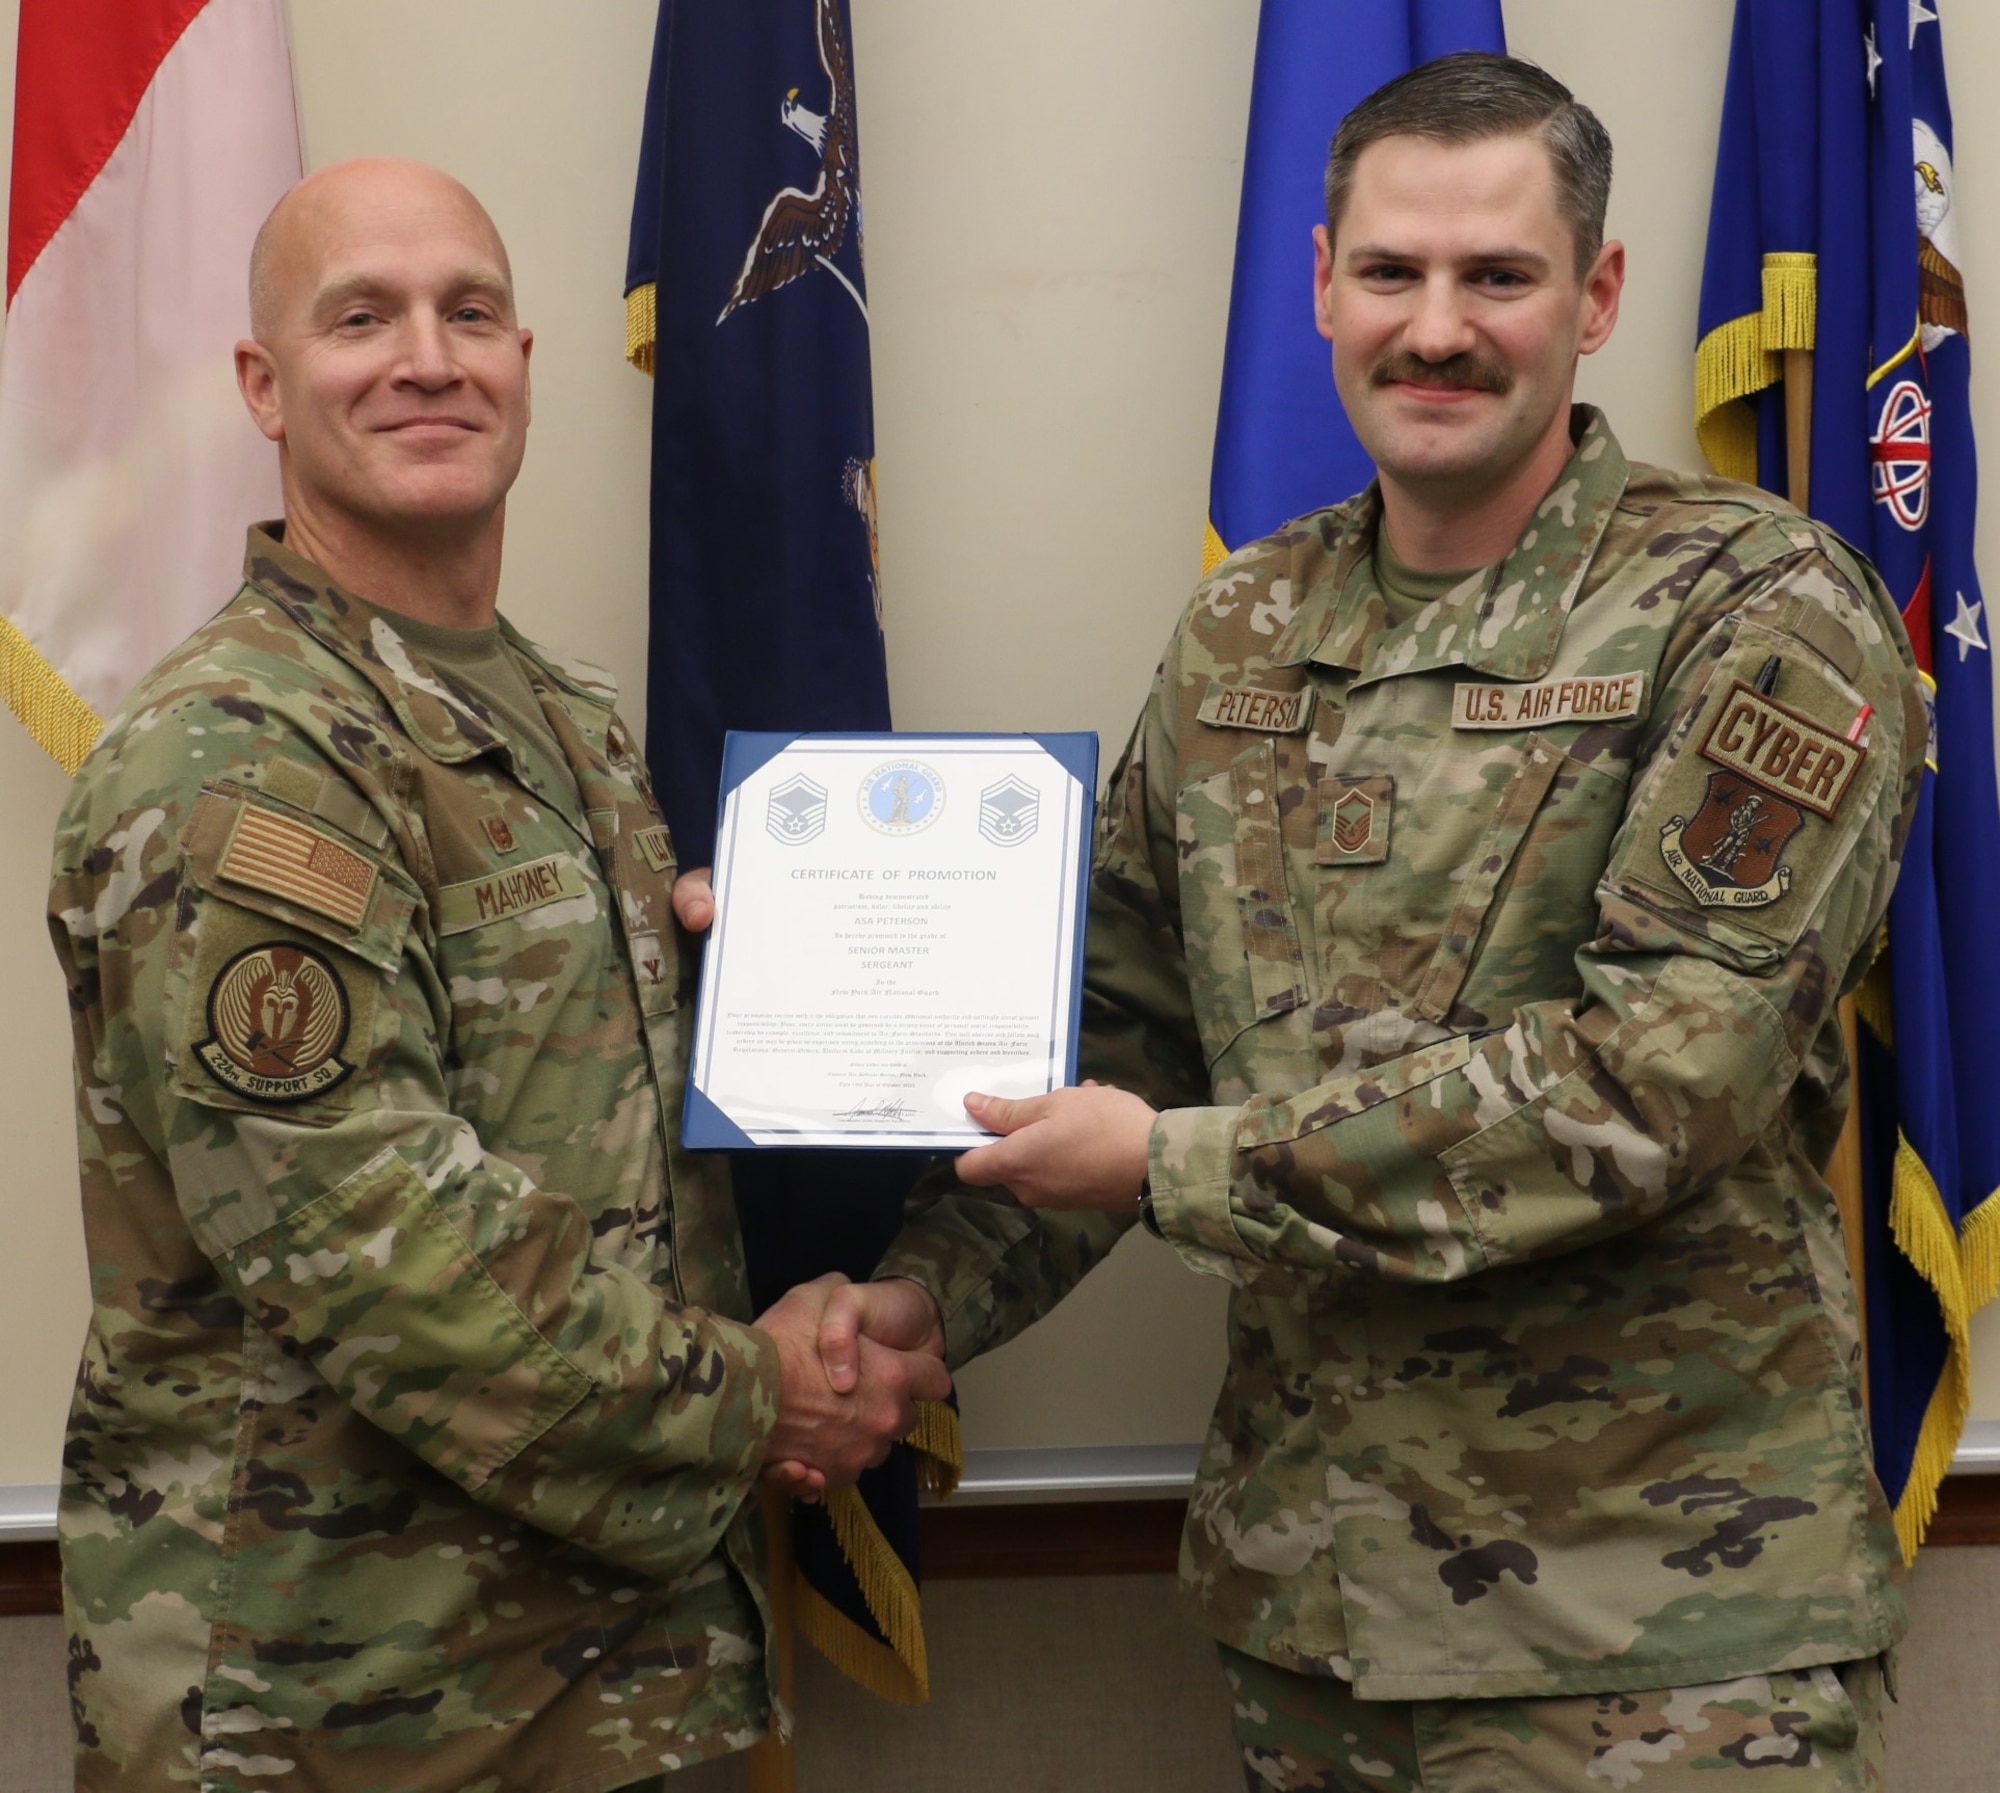 224th ADG Airman promoted to Senior Master Sgt.